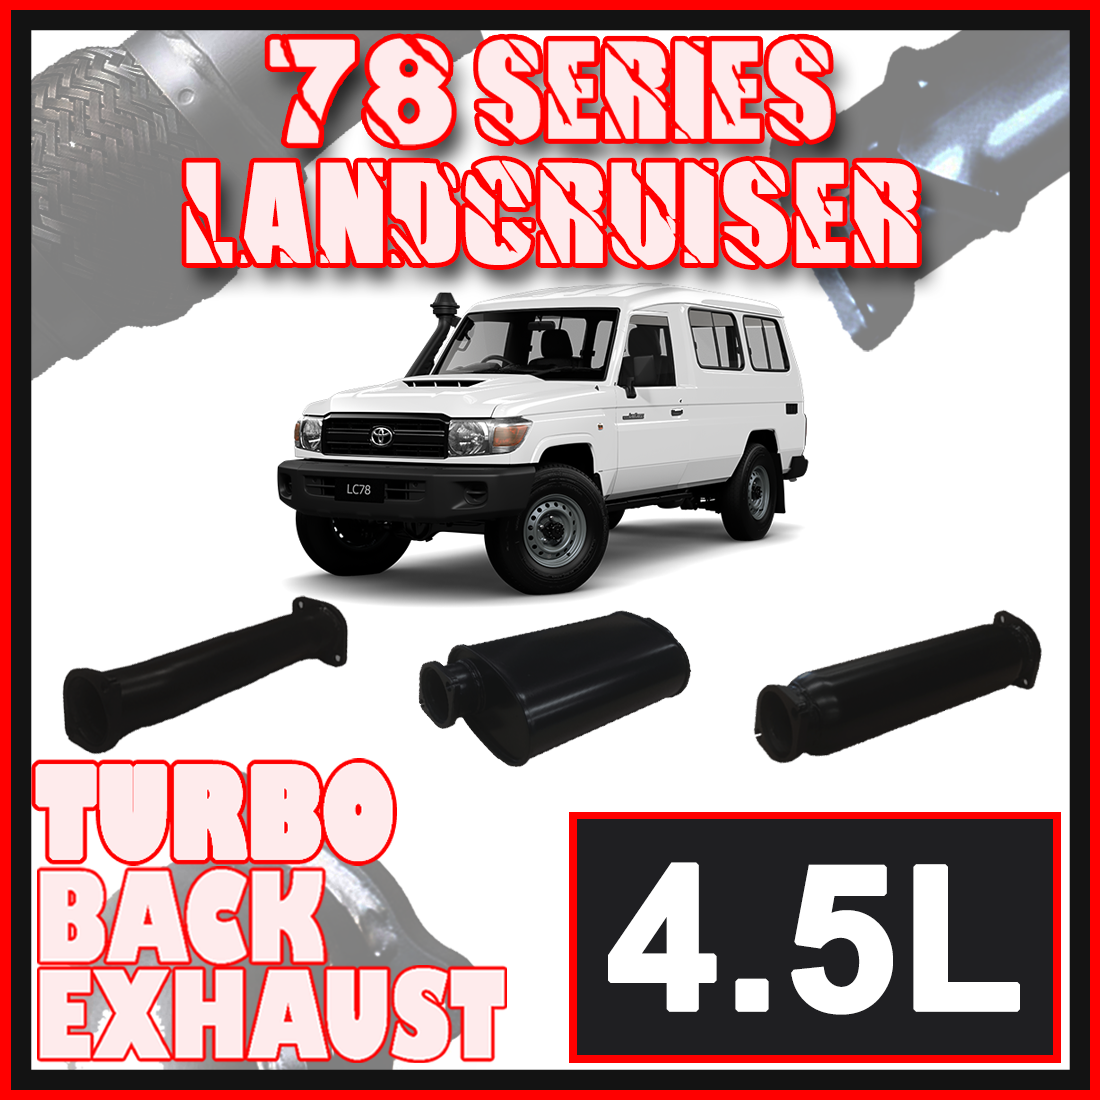 Toyota Landcruiser Exhaust 78 Series Troop Carrier 3" Turbo Back Systems image